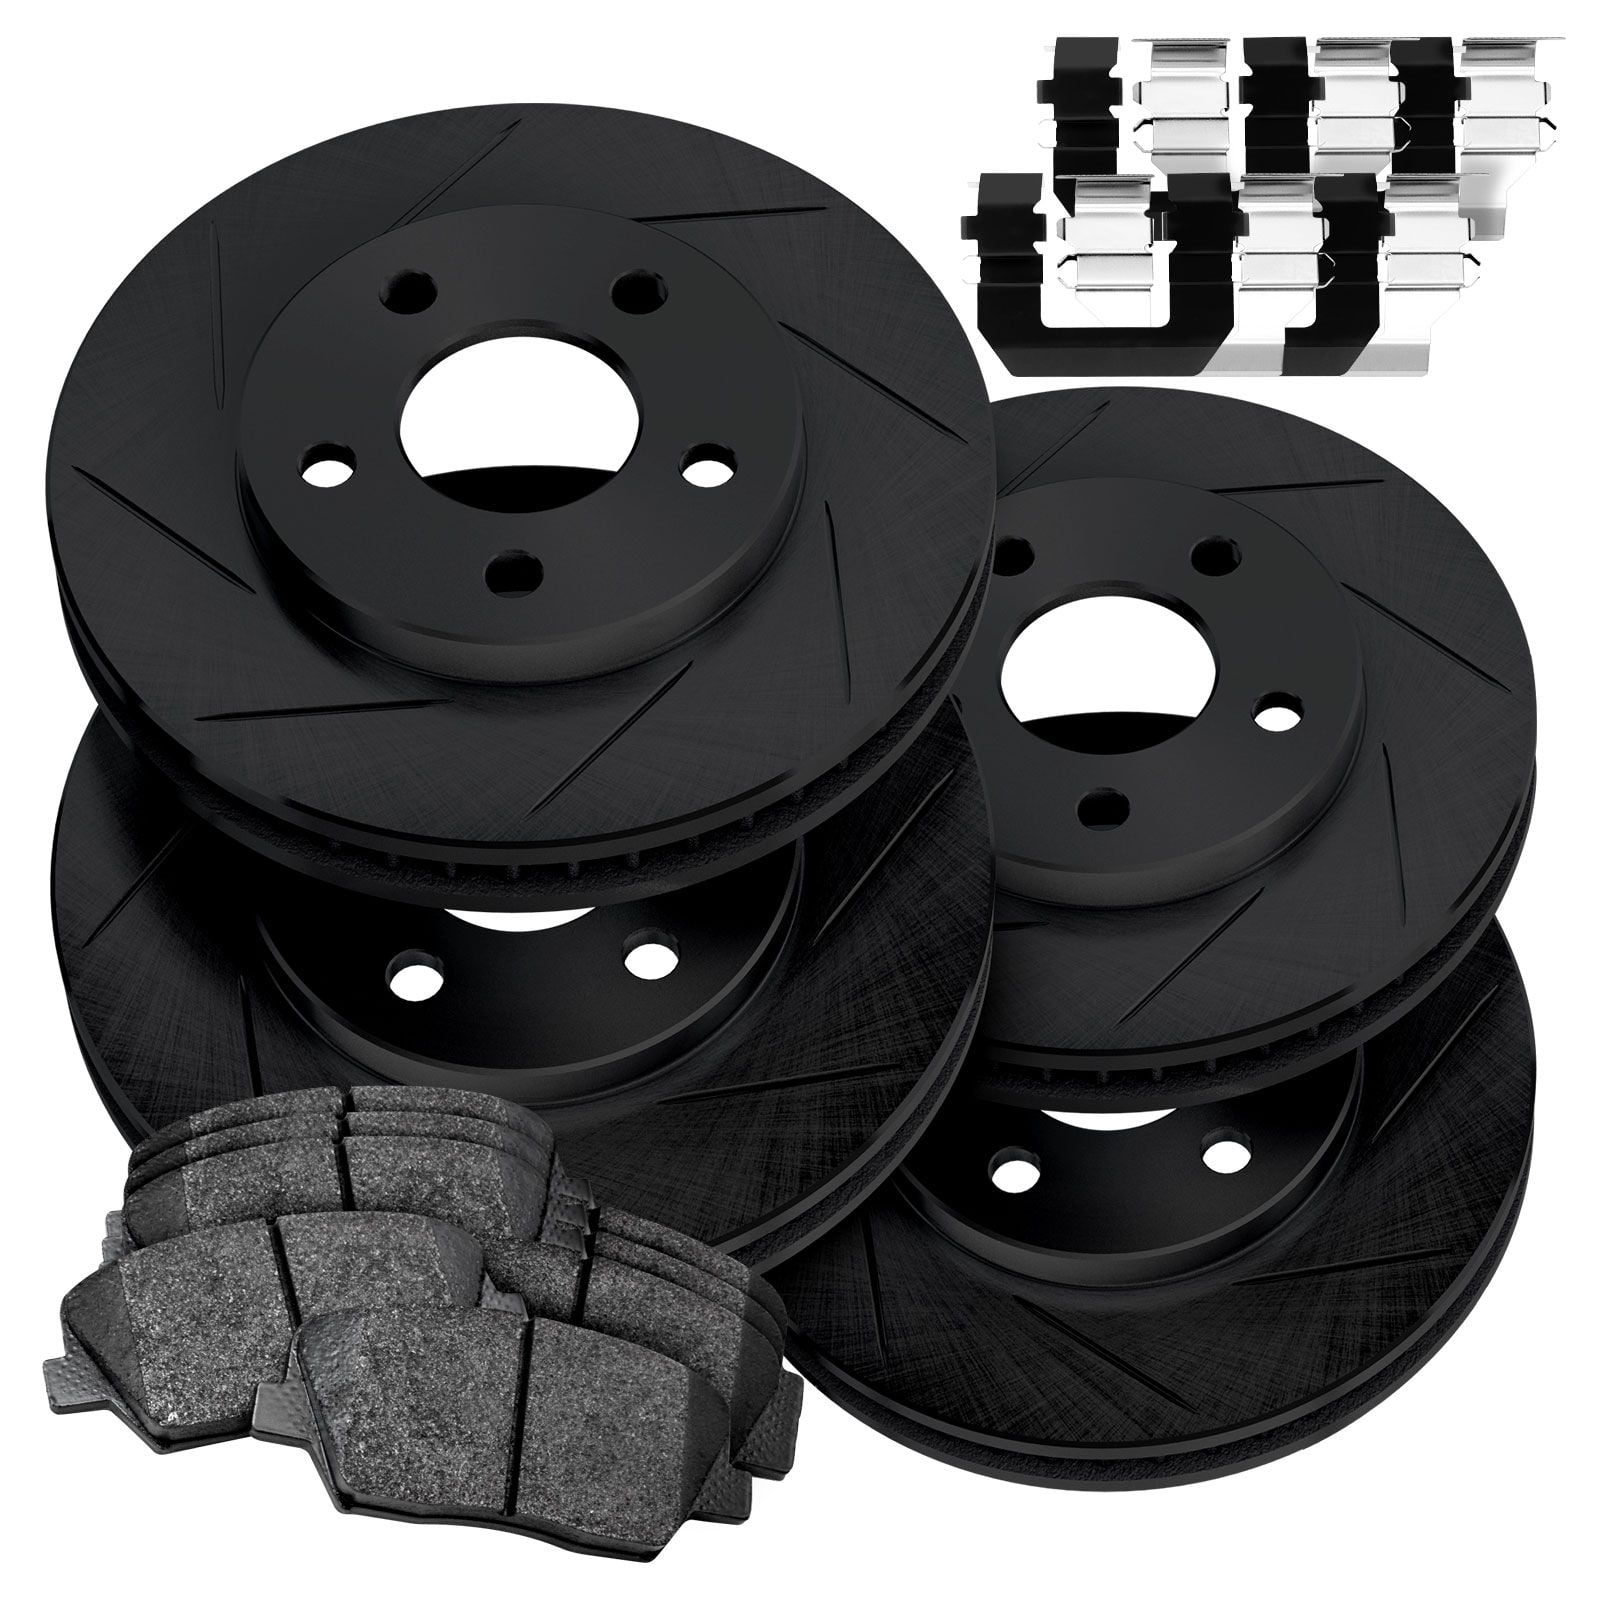 PowerSport Front Rear Brakes and Rotors Kit |Front Rear Brake Pads